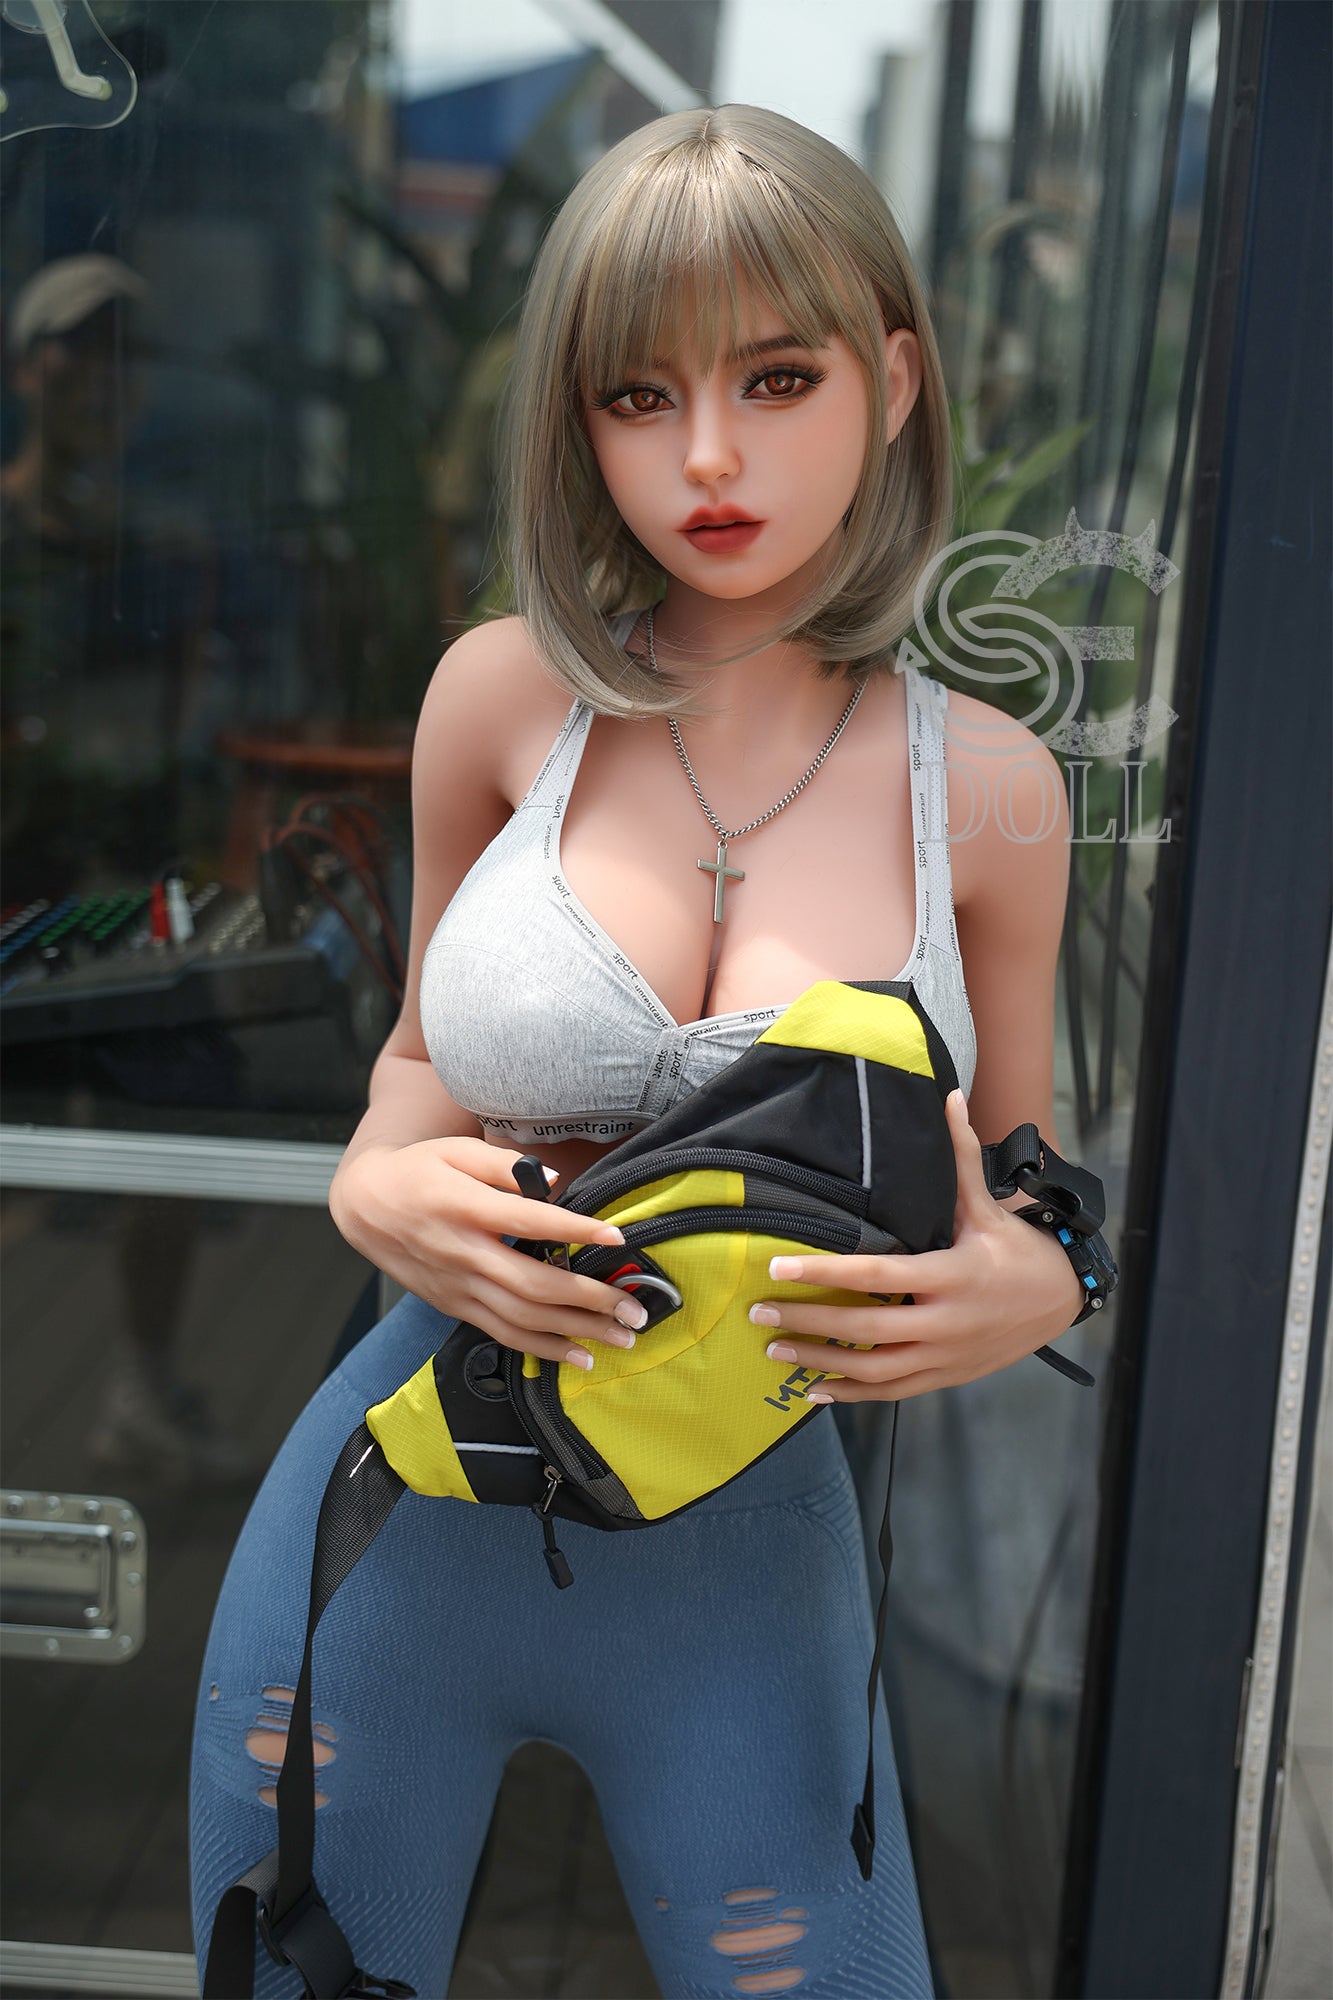 SEDOLL 161 cm F TPE - Melody | Buy Sex Dolls at DOLLS ACTUALLY